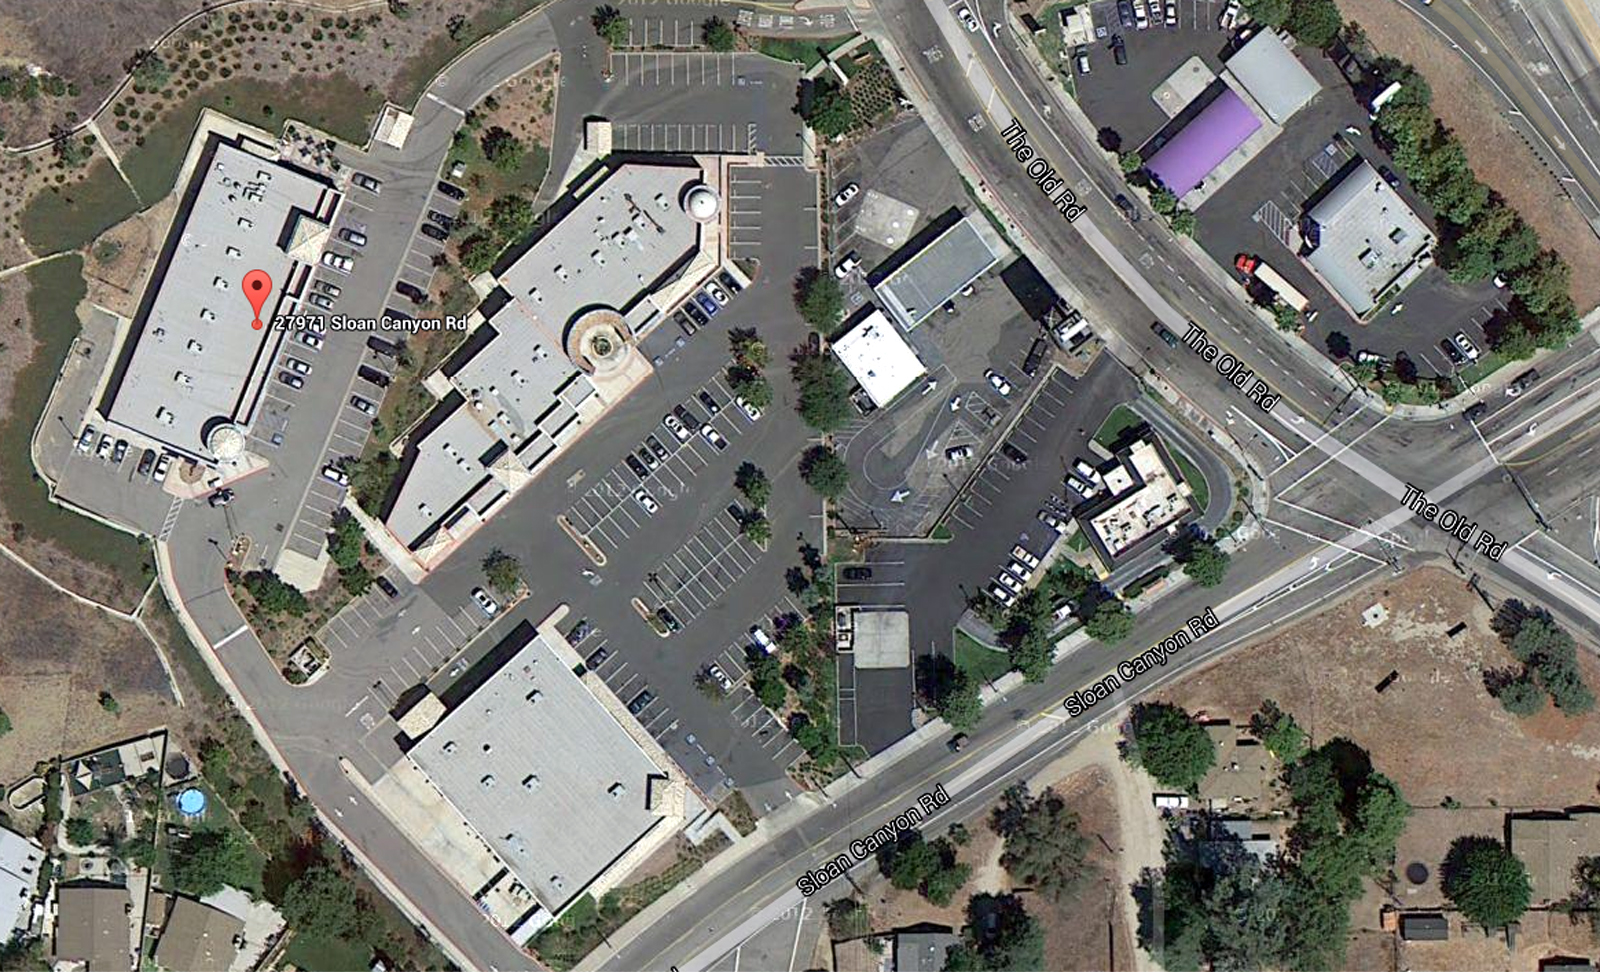 Castaic Library location